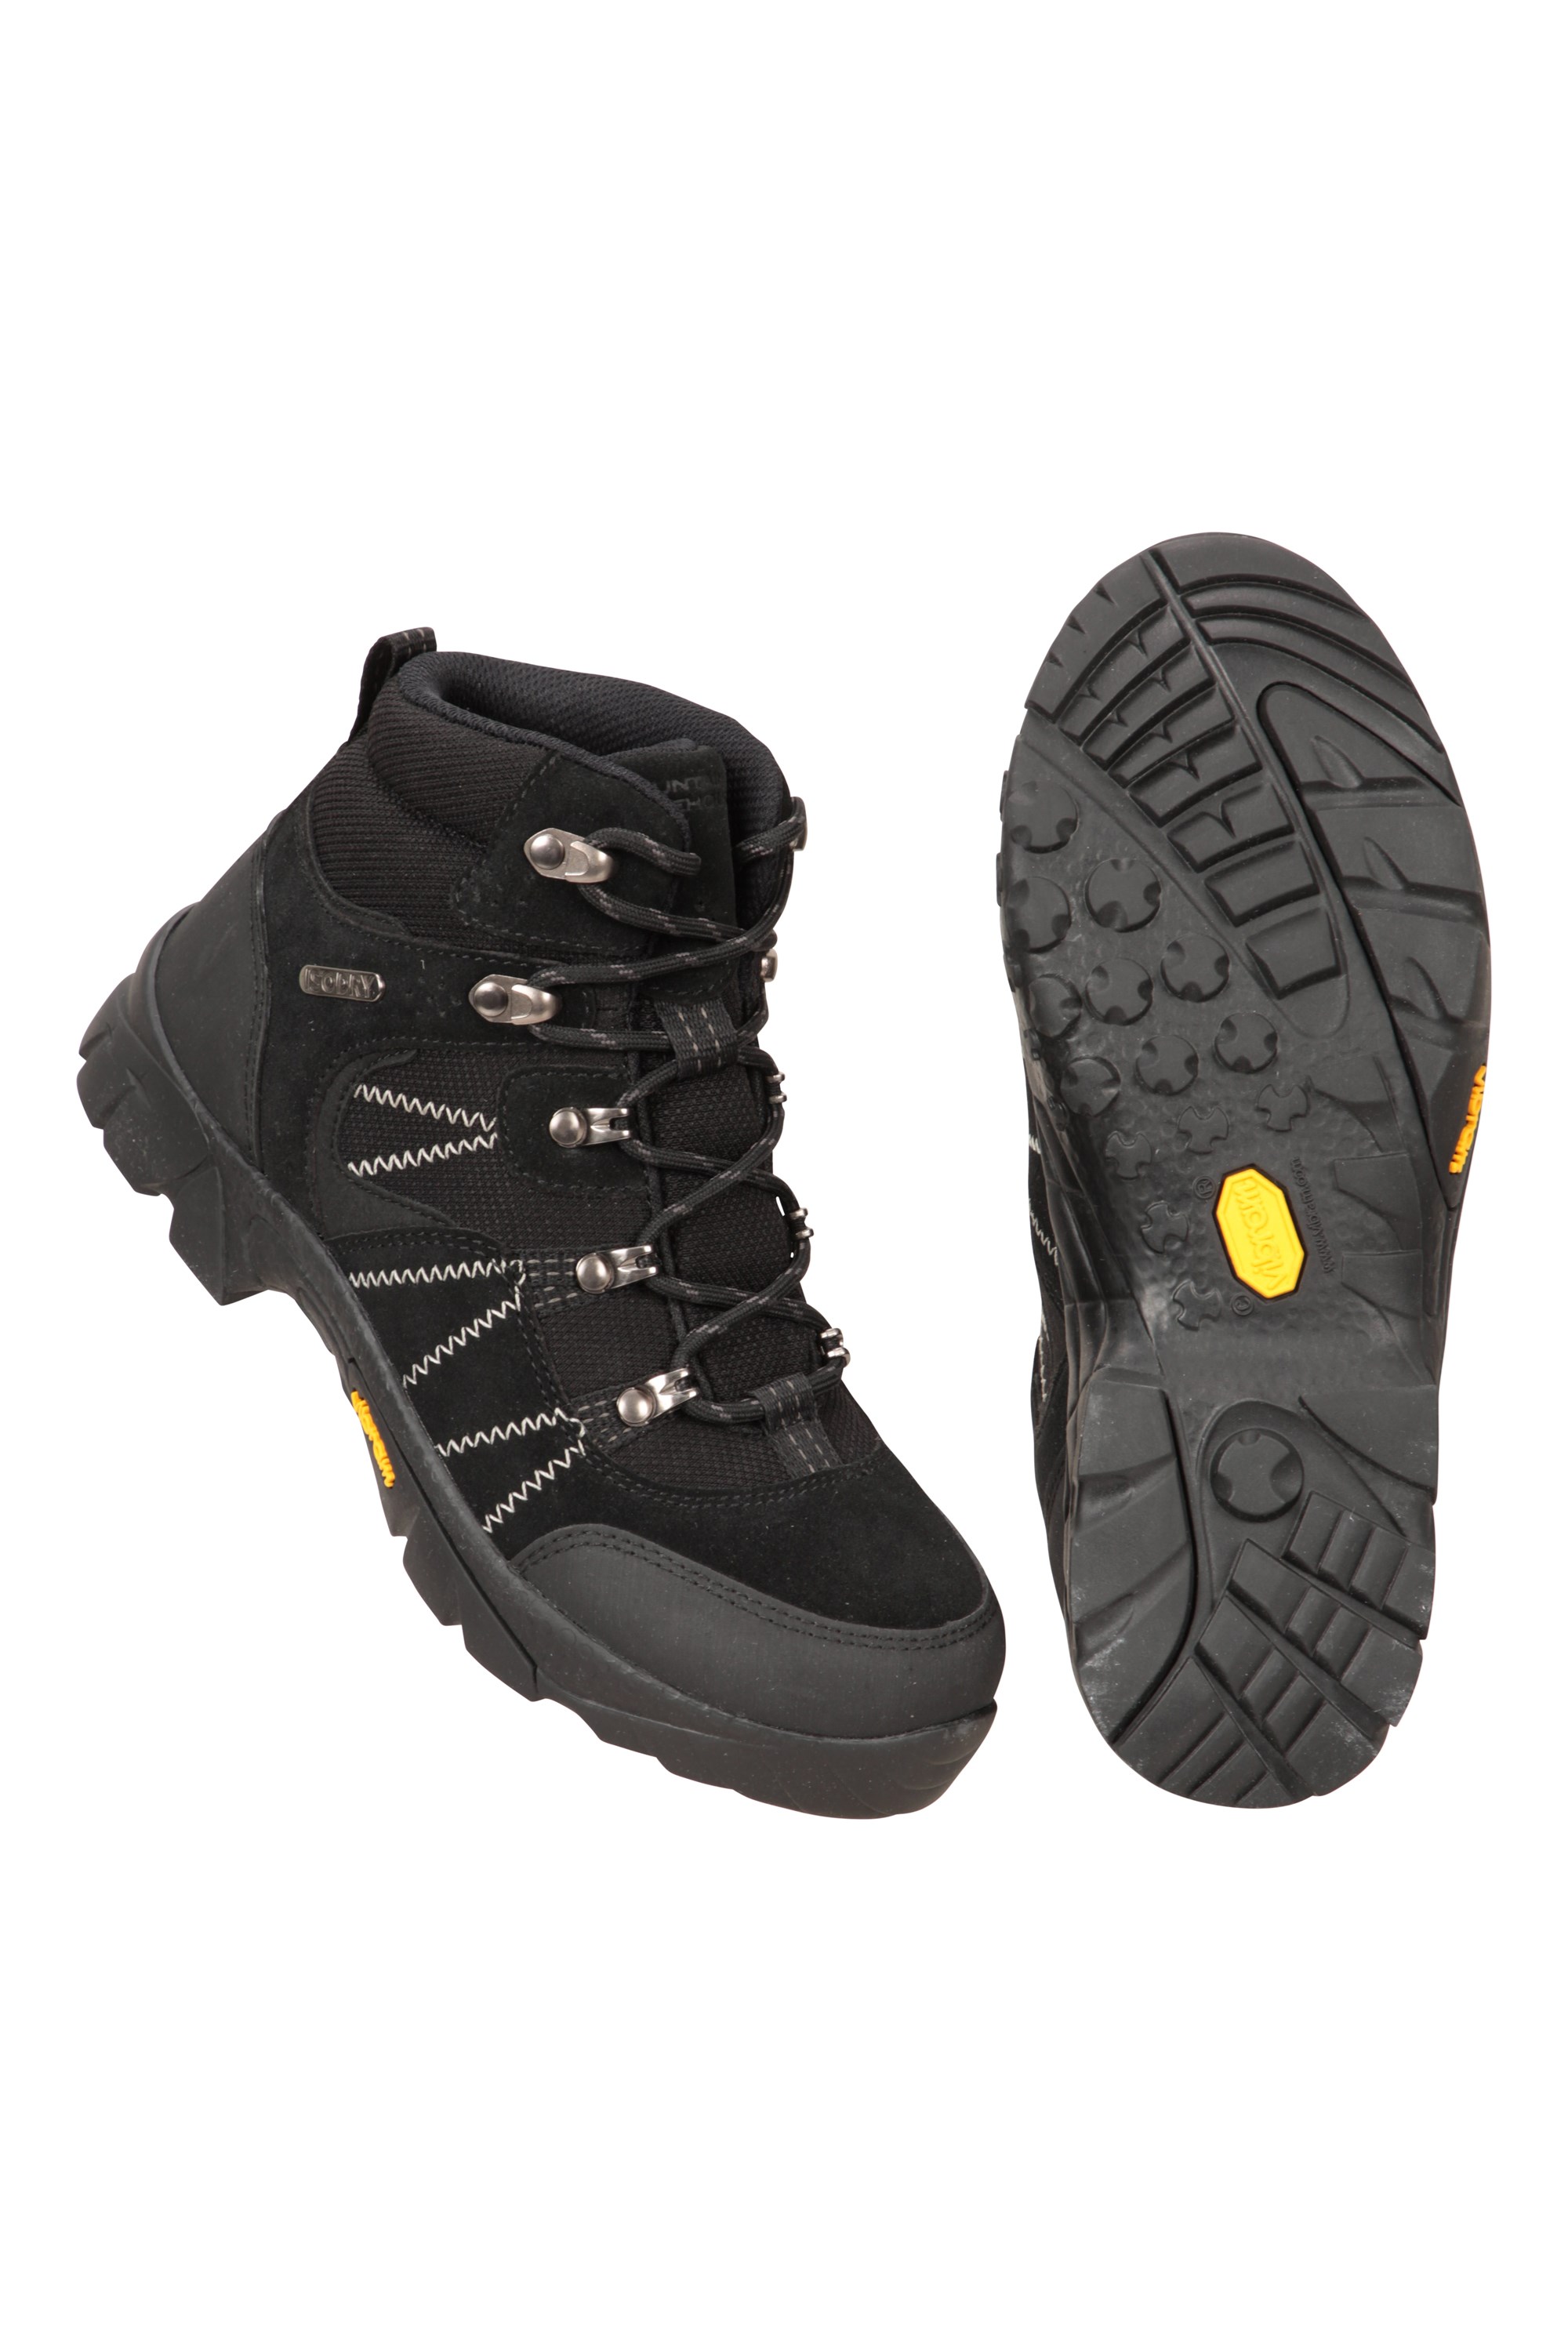 Mountain Warehouse Boys Waterproof Boots Suede & Mesh Upper with Ankle Padding 